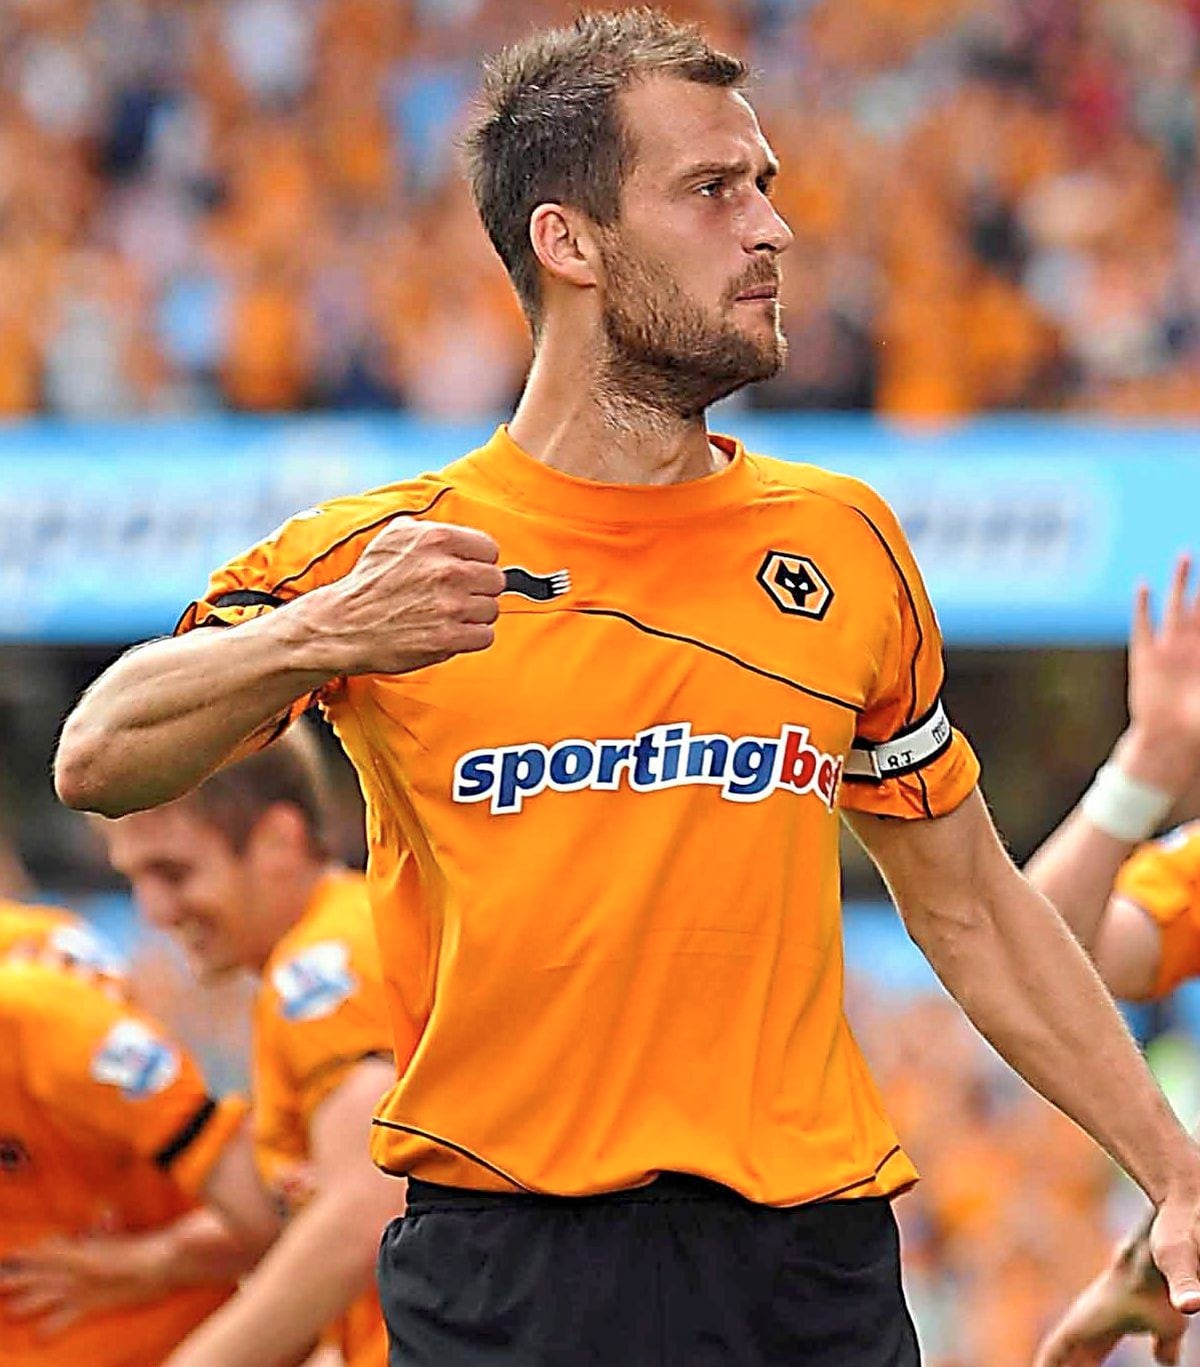 21/8/2011. PIC BY ED BAGNALL. Wolves V Fulham in the Premier League at Molineux. Roger Johnson celebrates Matt Jarvis’s goal.